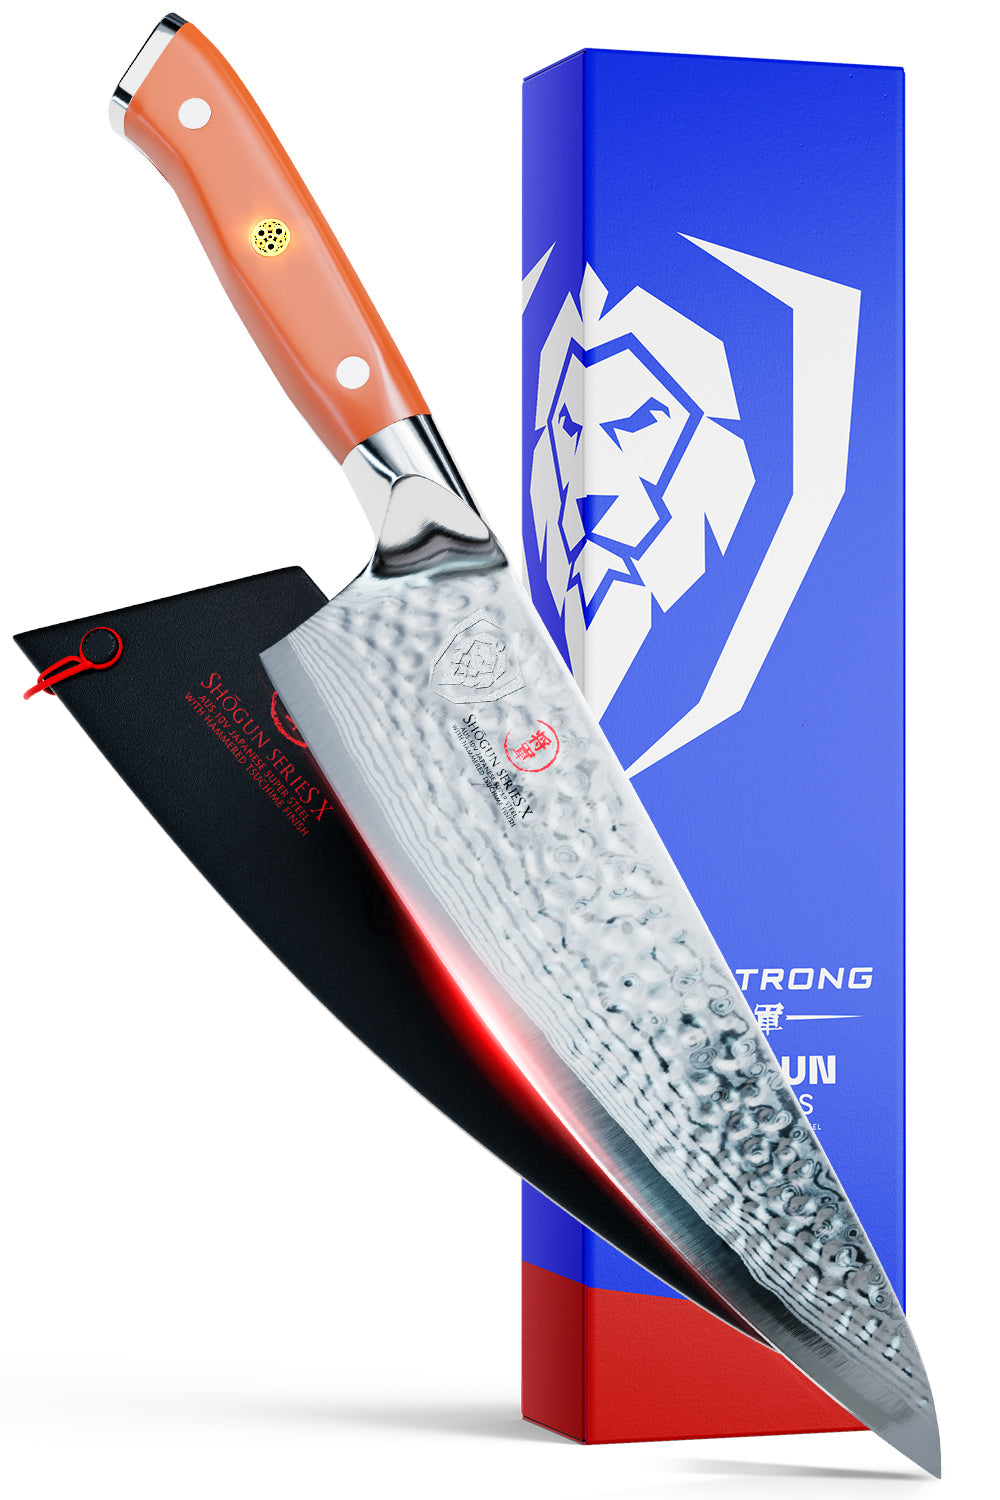 Dalstrong shogun series 8 inch chef knife with flame orange handle in front of it's premium packaging.